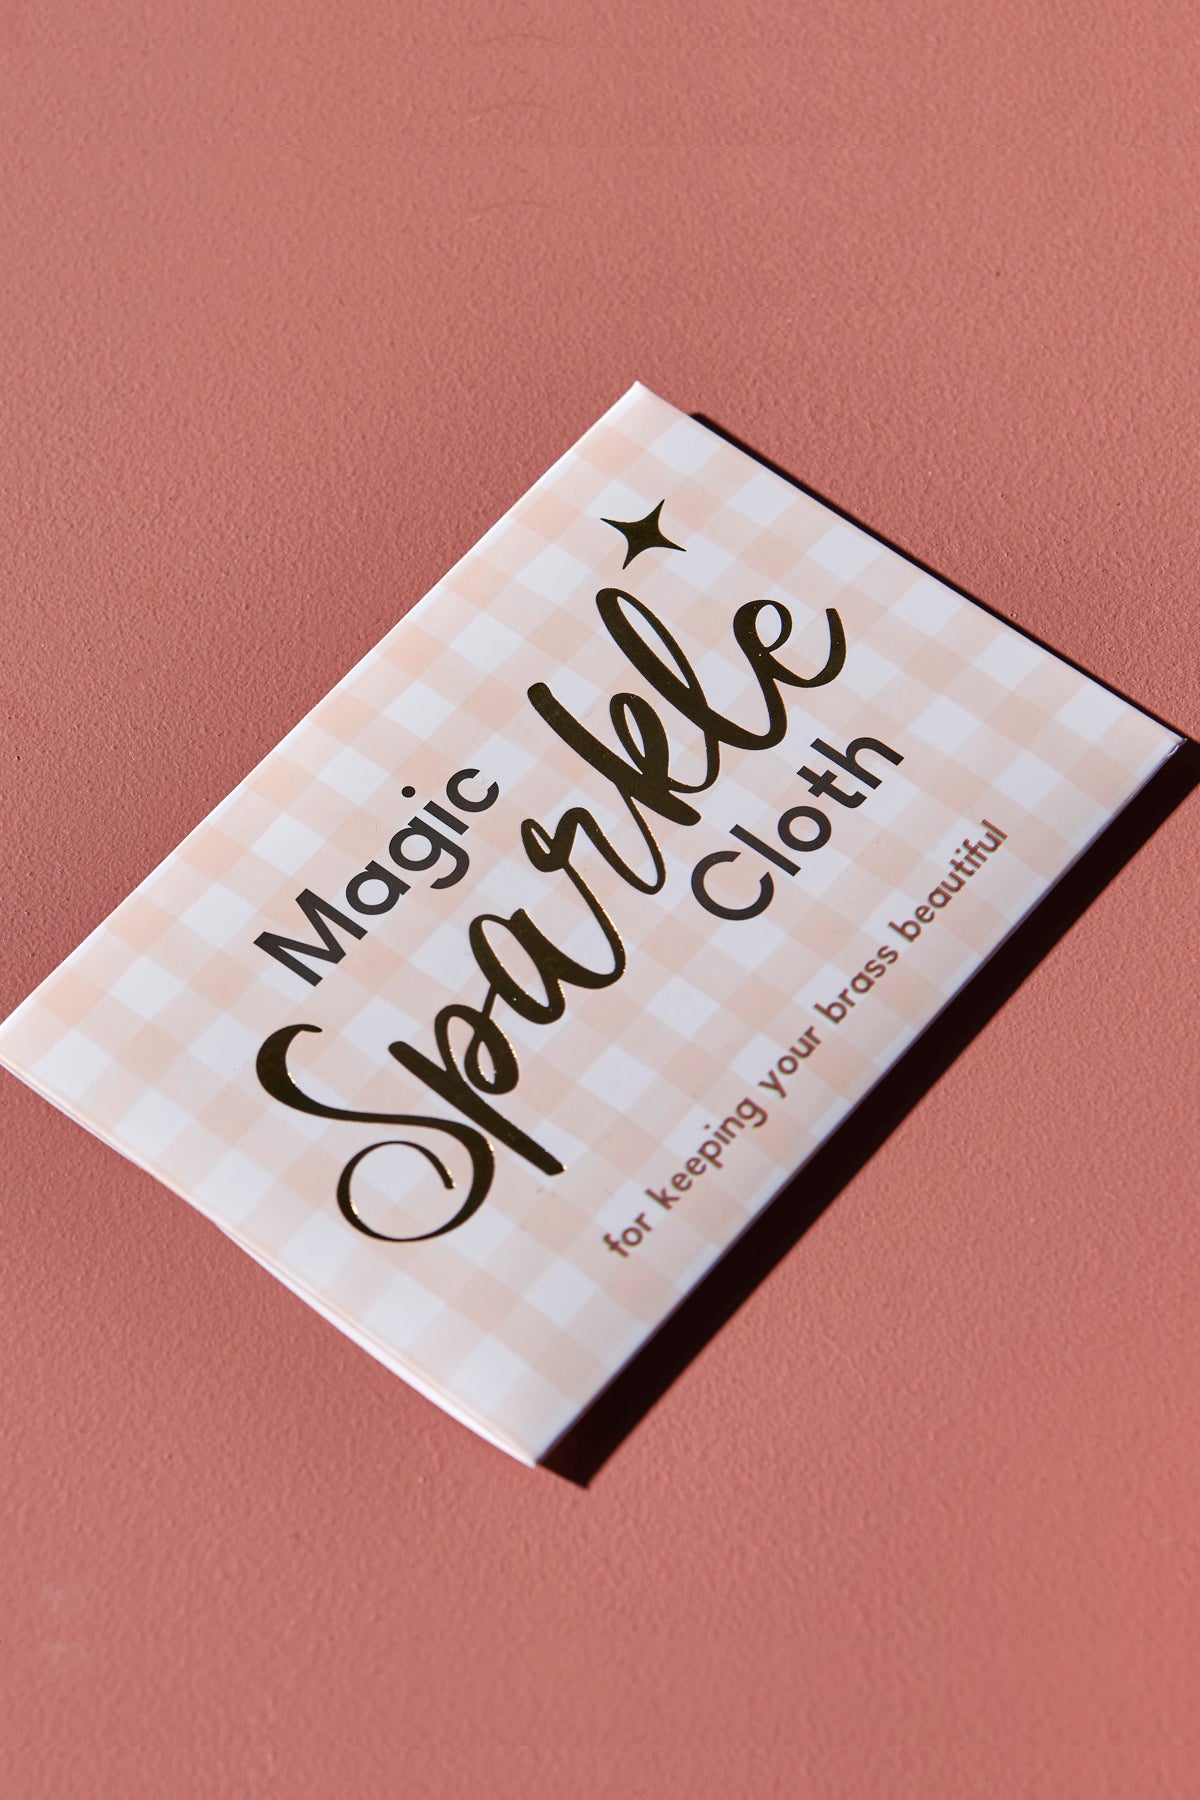 An pink checkered envelope with the words 'Magic Sparkle Cloth for keeping your brass beautiful' written in gold foil, sits against a pink background.